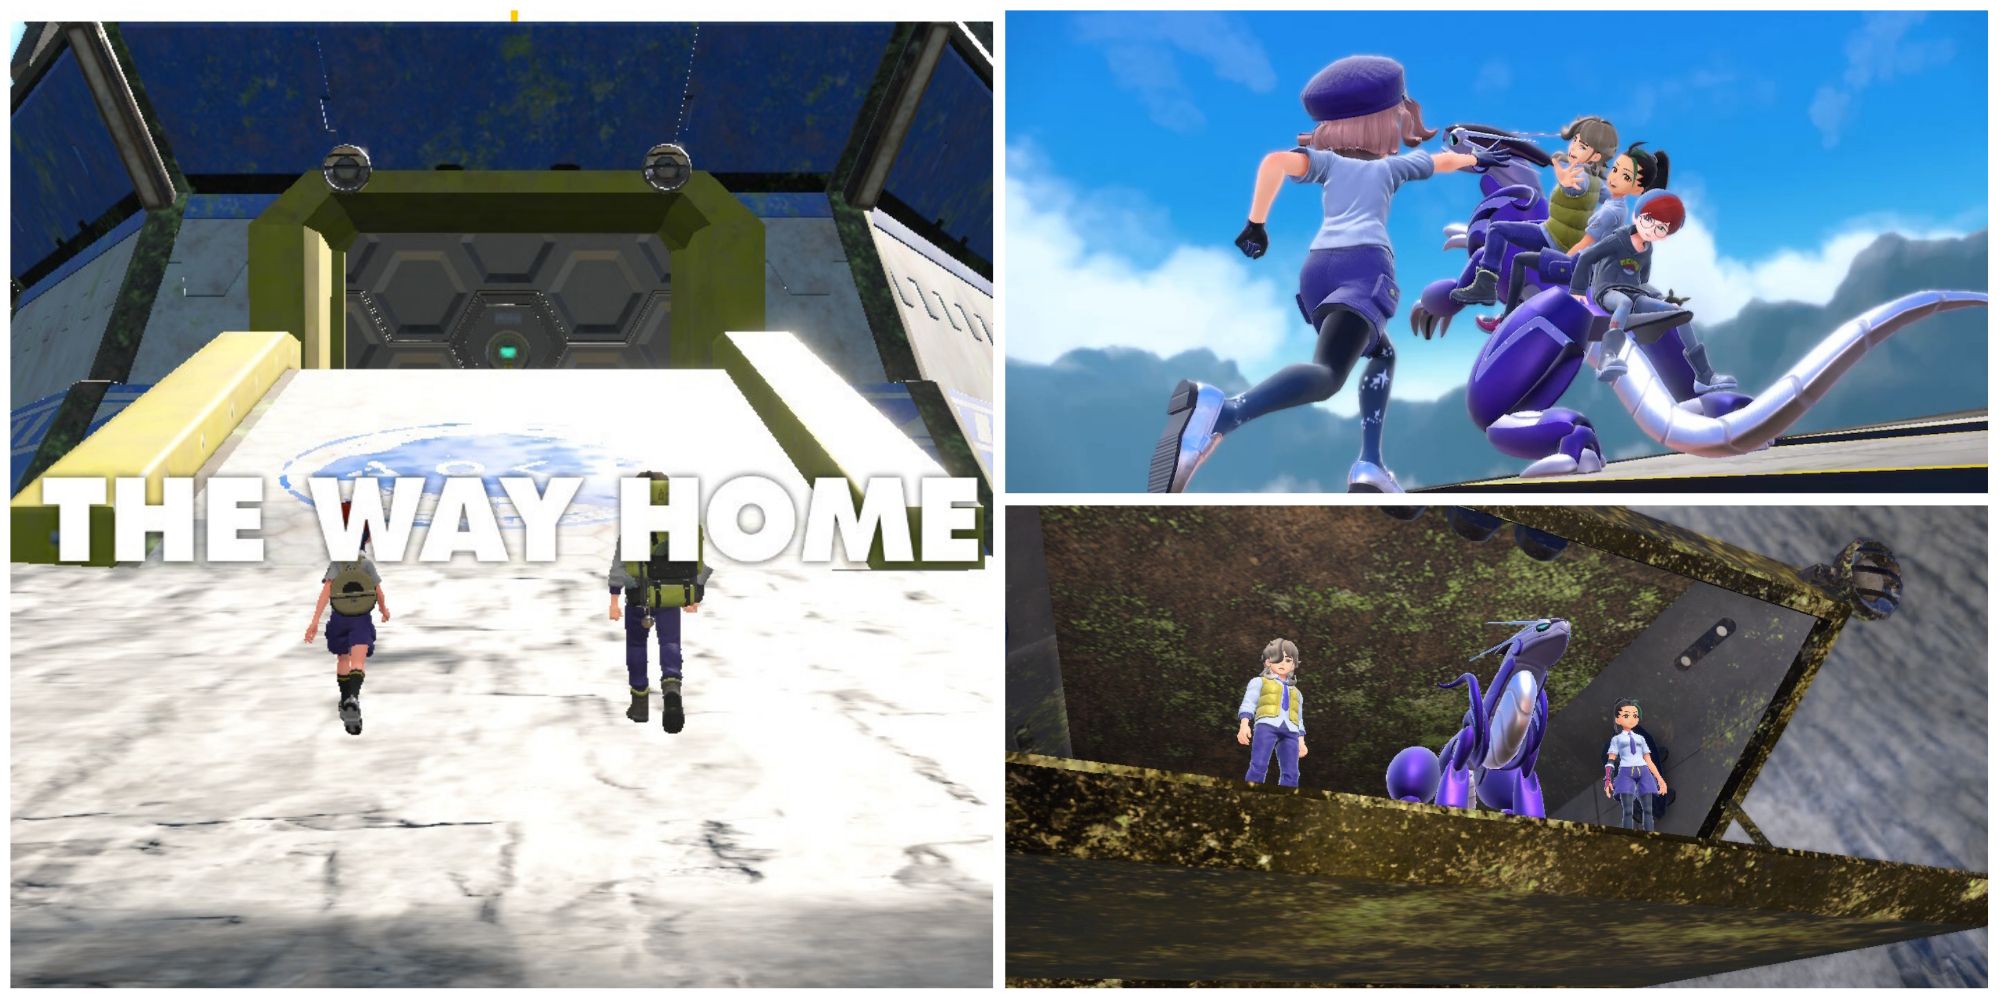 How to Use Pokémon Home with Pokémon Scarlet and Violet